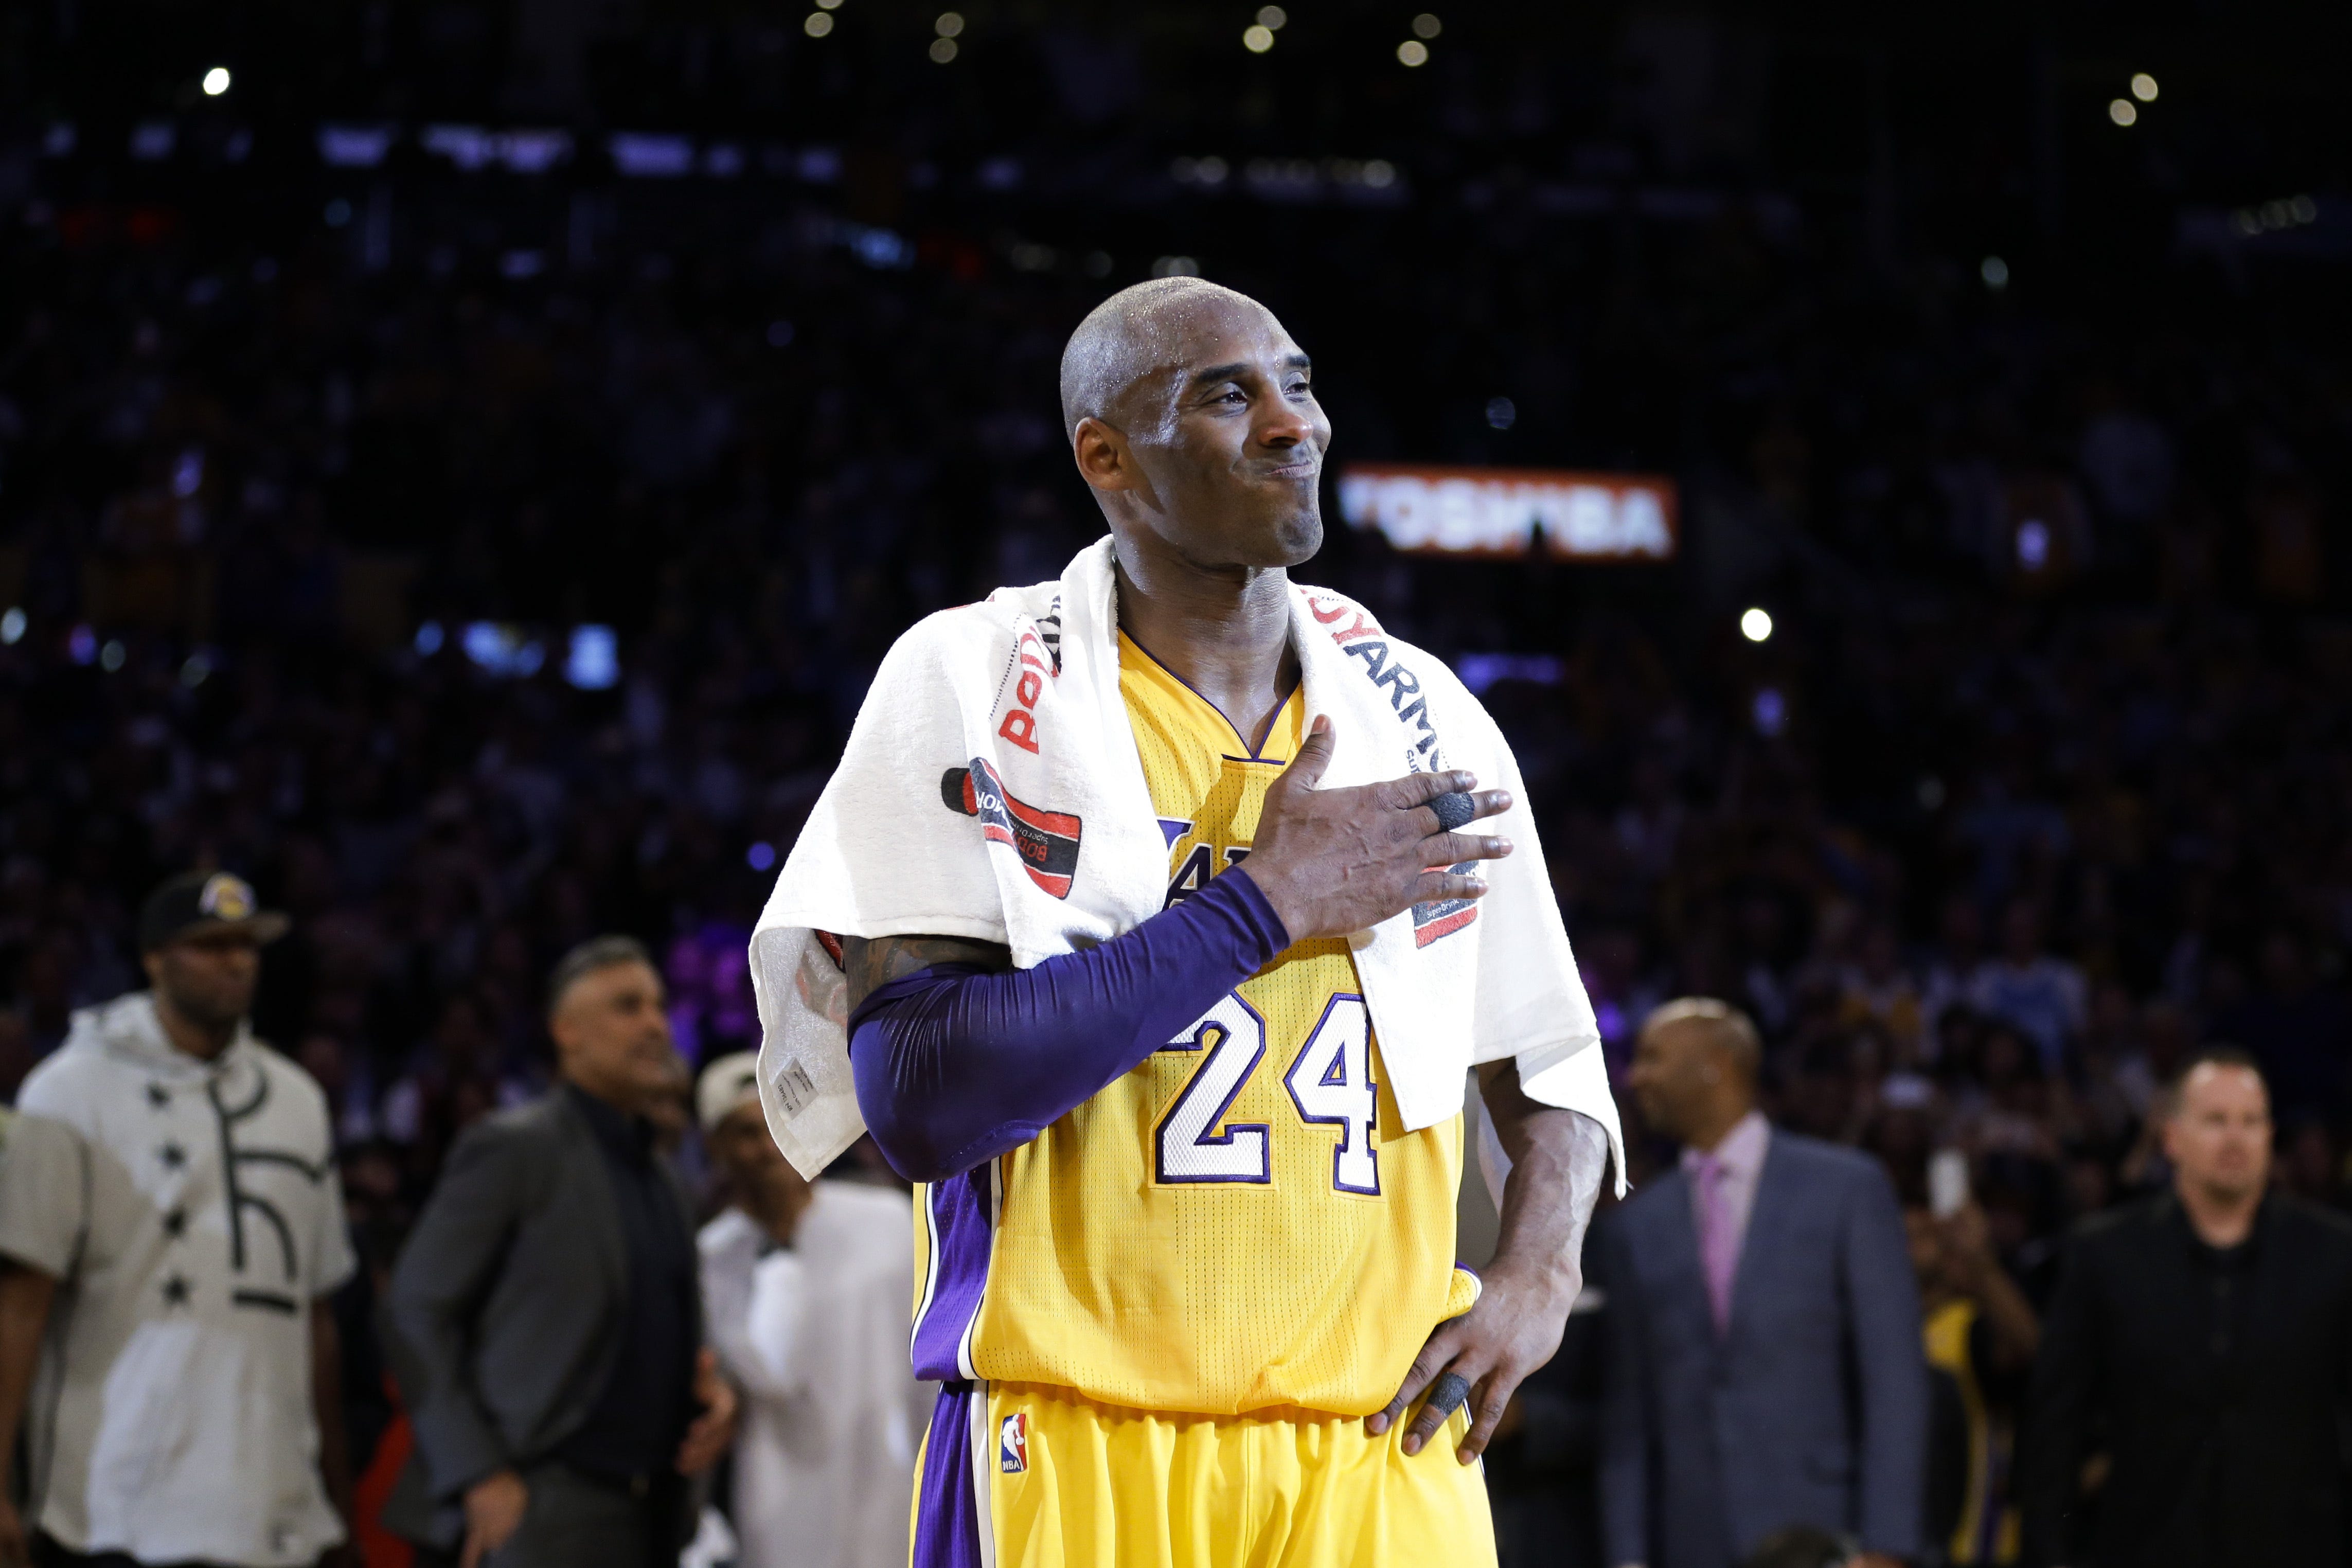 Kobe Bryant pounds his chest after the last NBA game of his career on April 13, 2006.